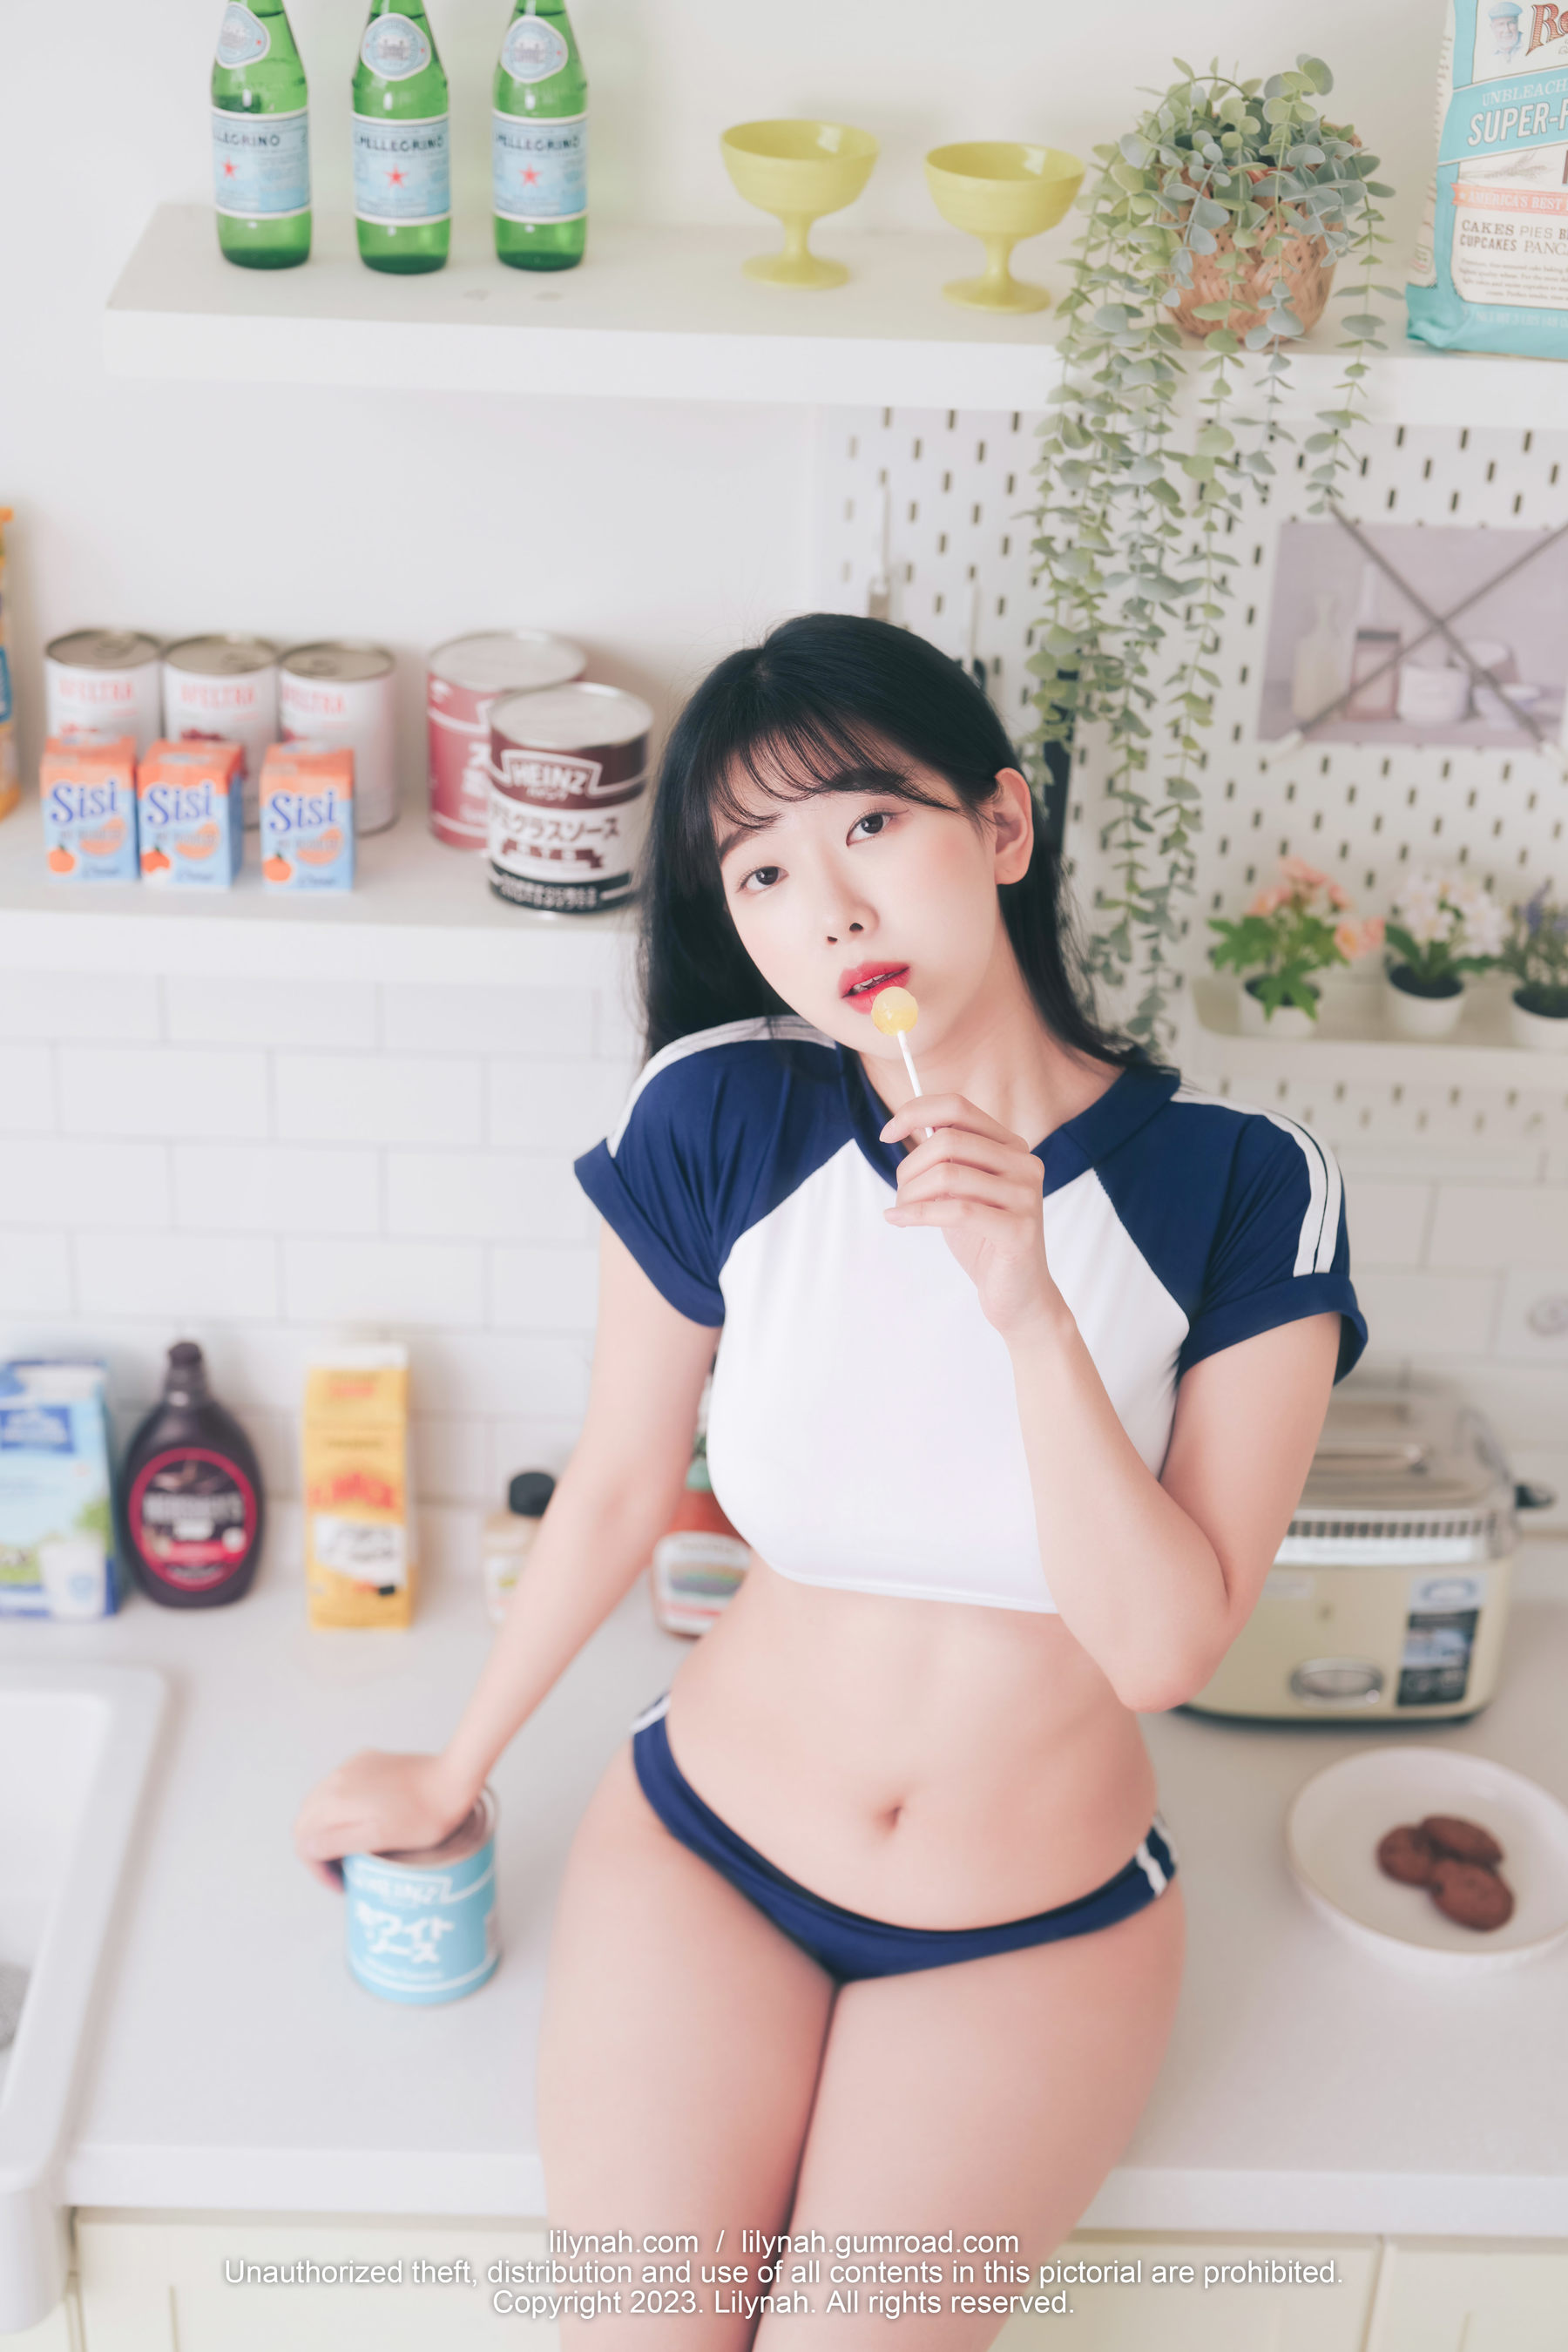 [Lilynah] Shaany - Vol.16 &amp; Bloomers  第3张